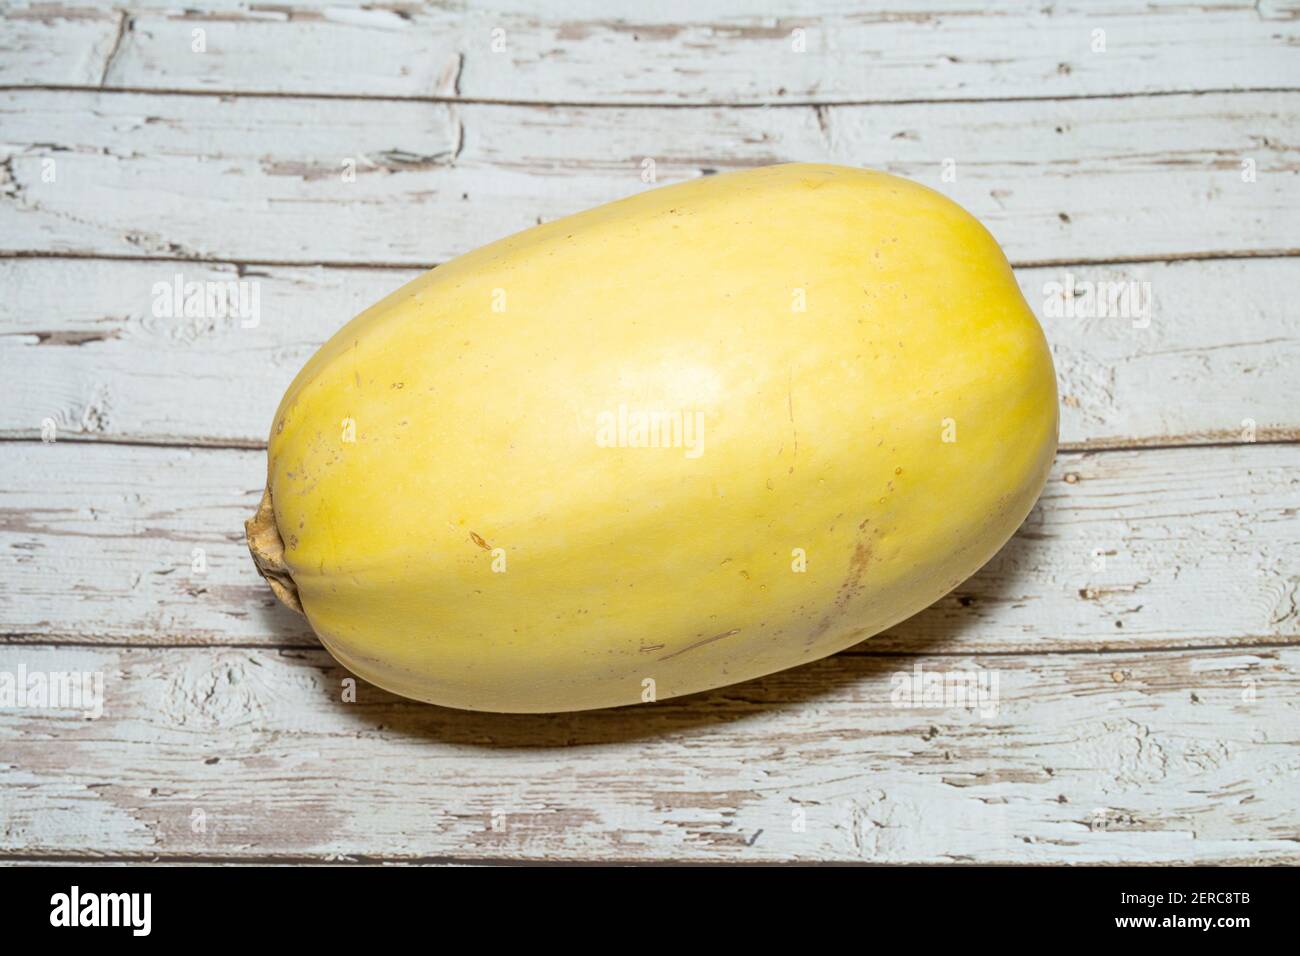 Spaghetti squash or vegetable spaghetti is a group of cultivars of Cucurbita pepo subsp. pepo. They are available in a variety of shapes, sizes, and c Stock Photo